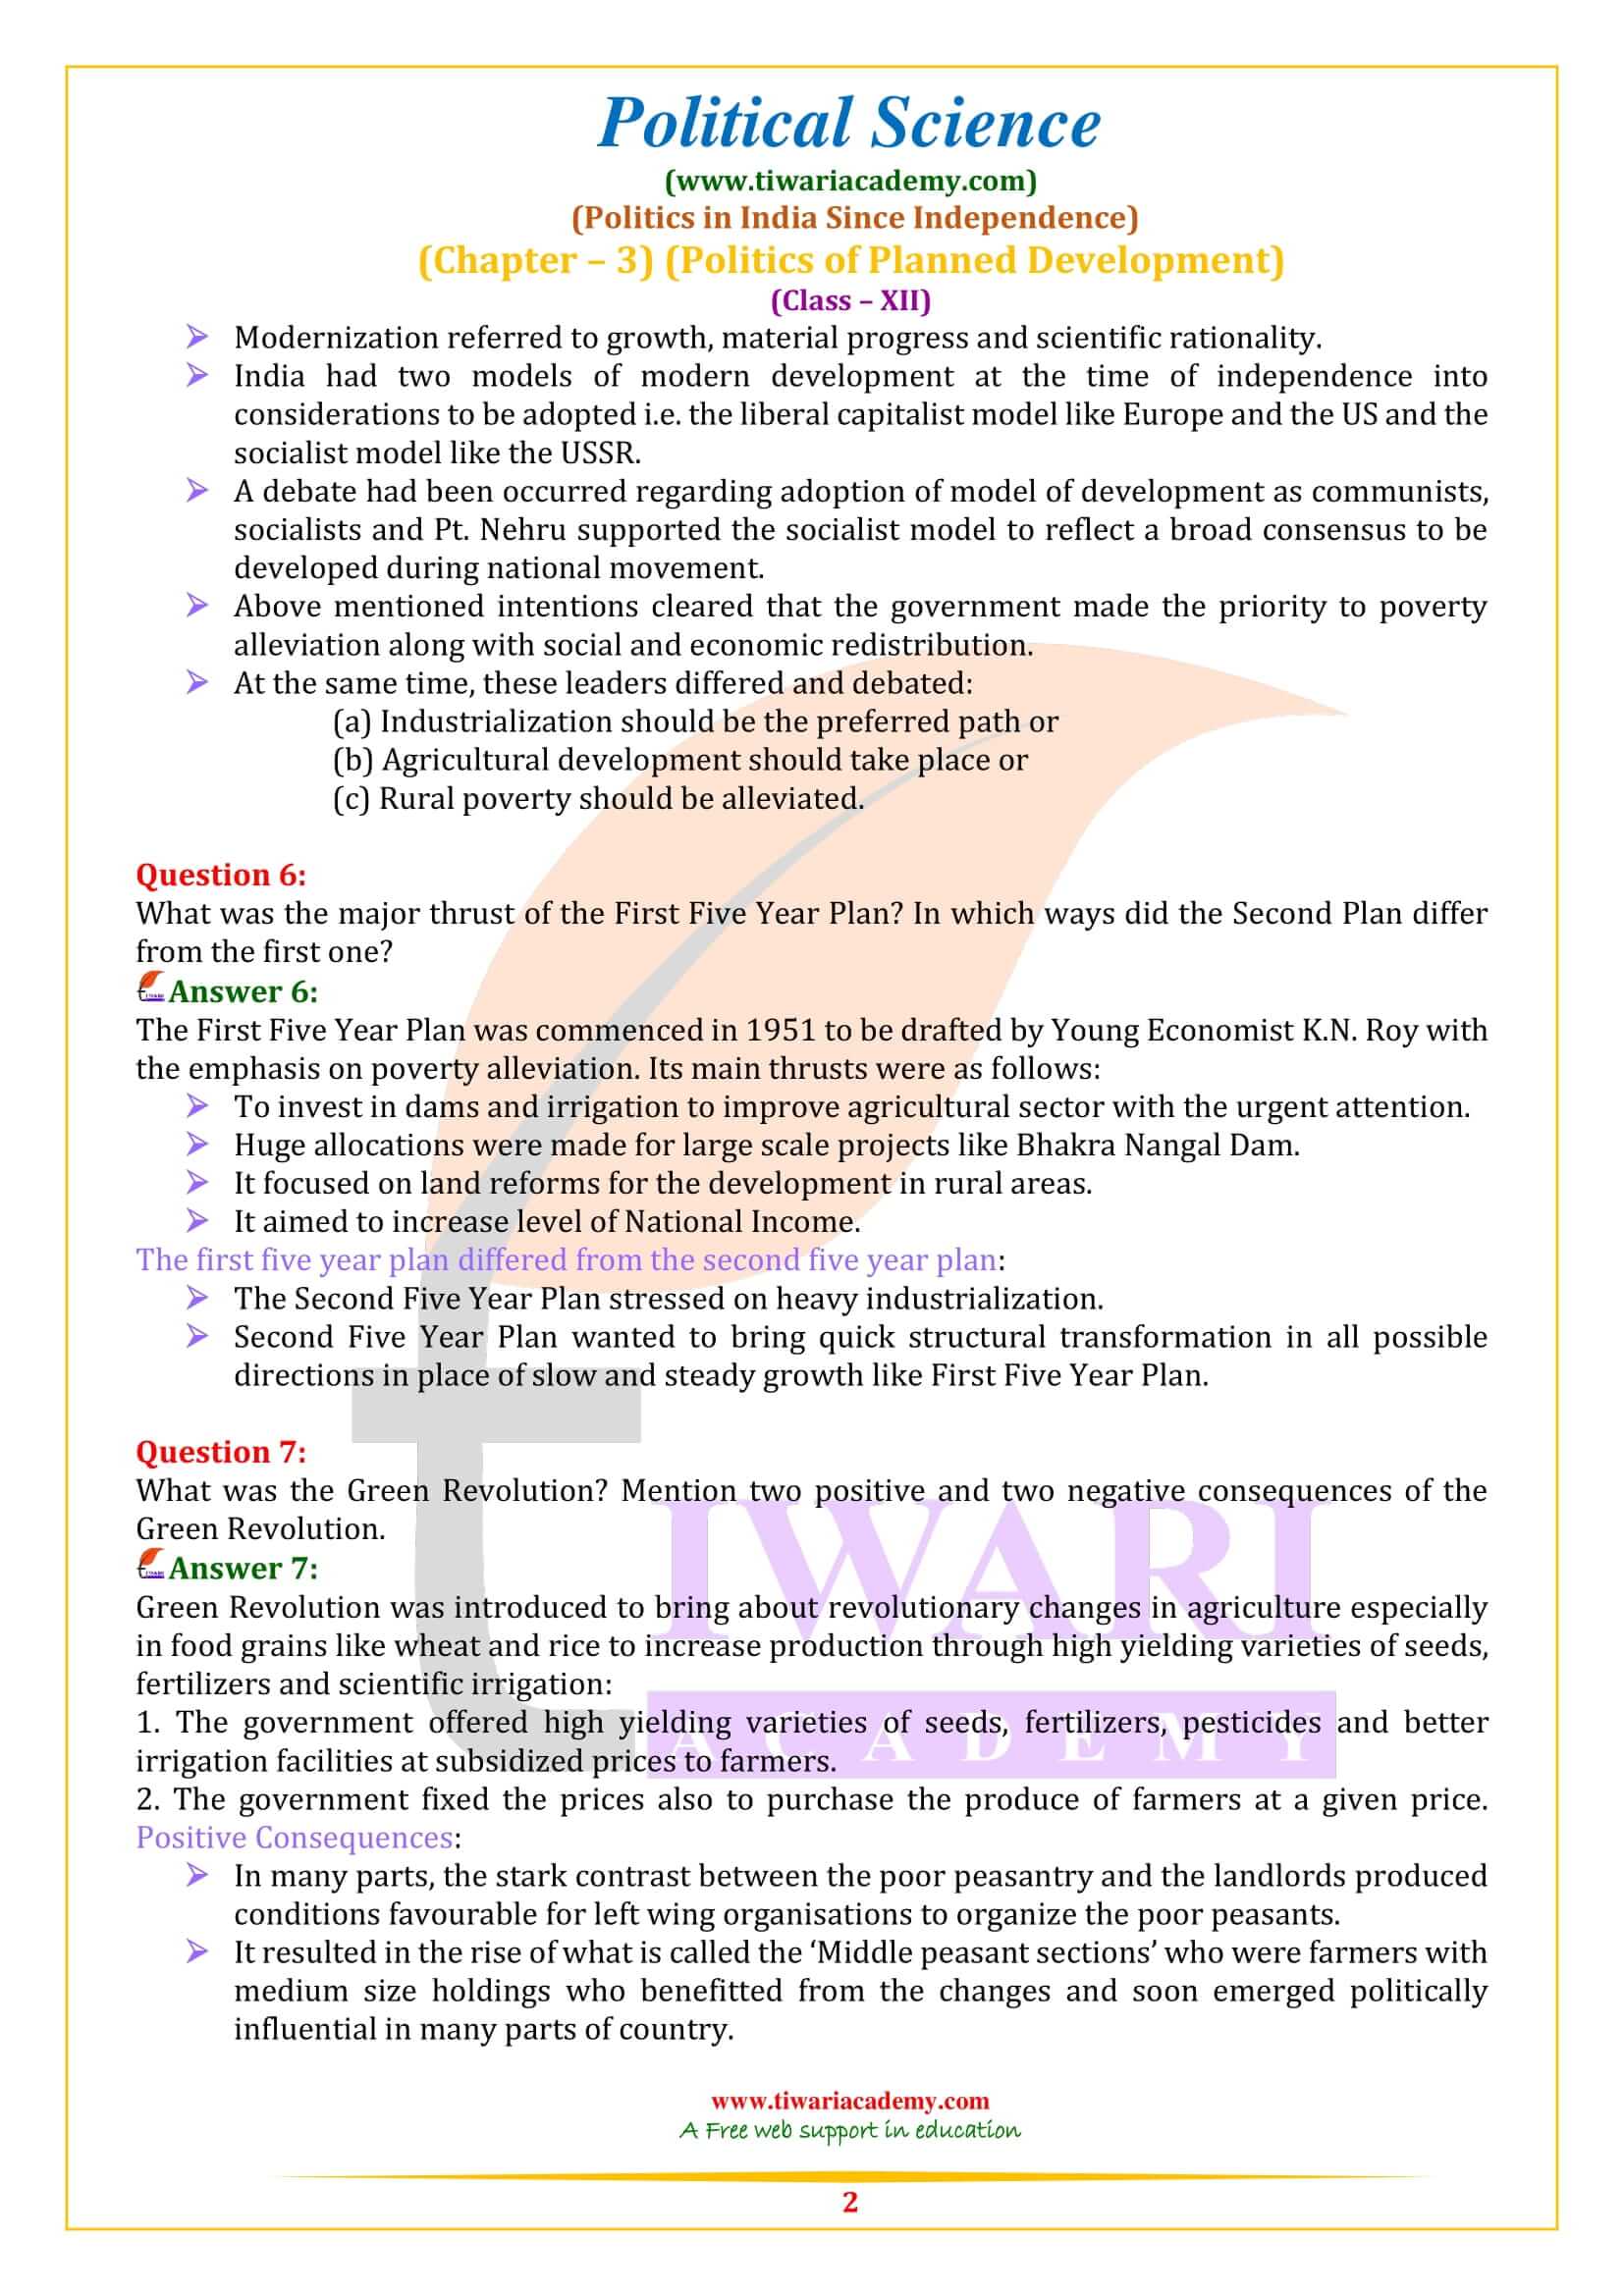 NCERT Solutions for Class 12 Political Science Part 2 Chapter 3